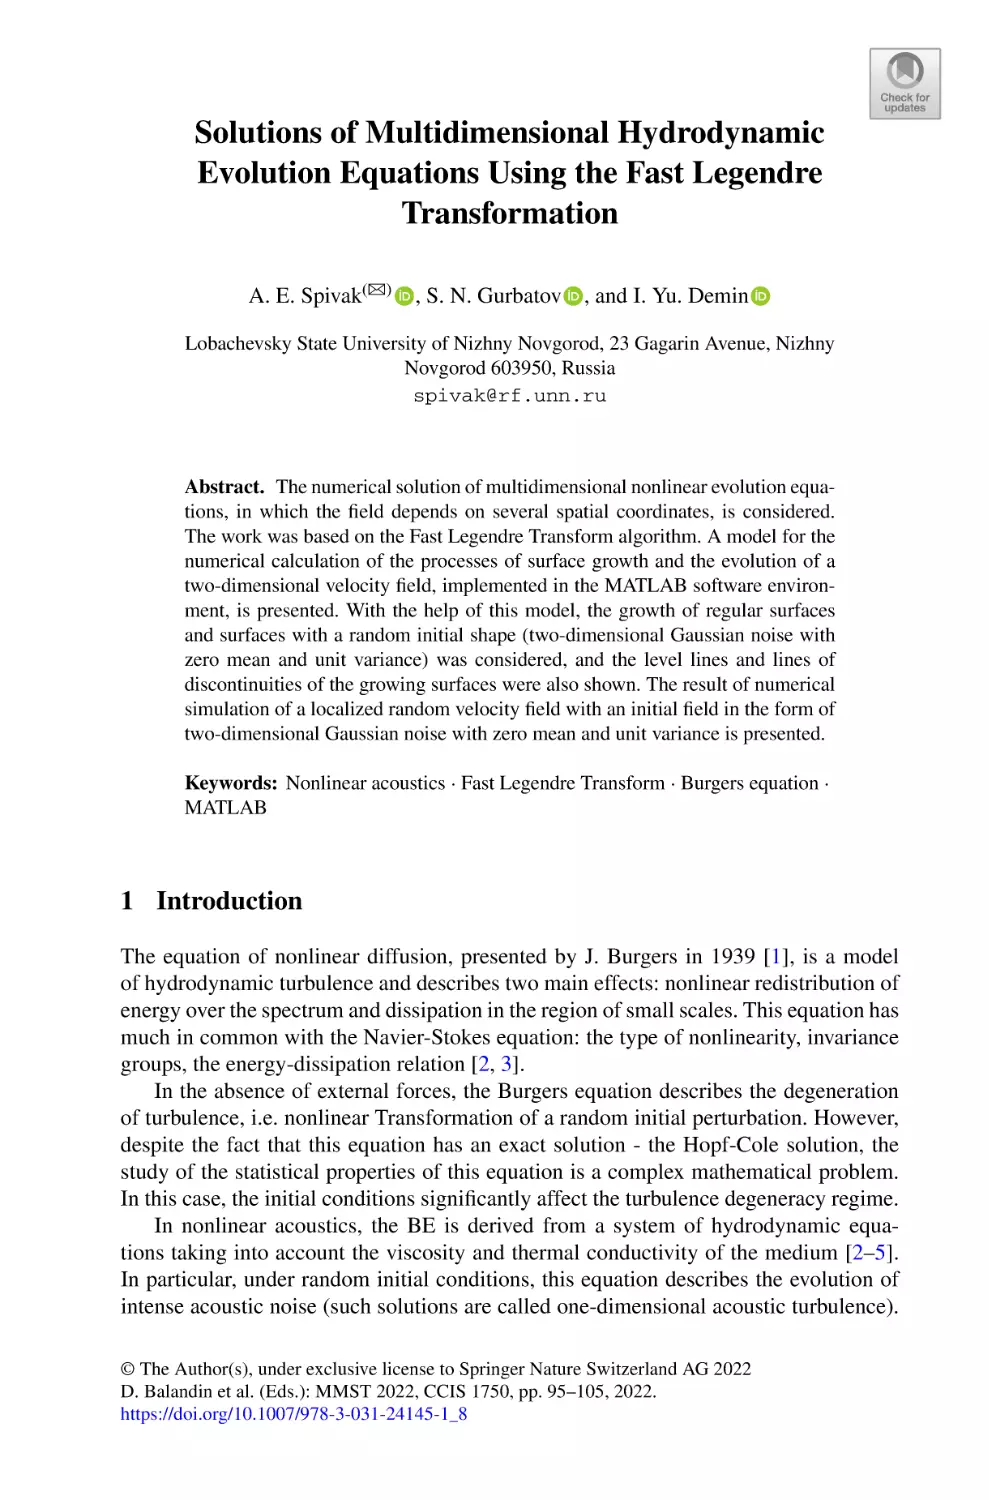 Solutions of Multidimensional Hydrodynamic Evolution Equations Using the Fast Legendre Transformation
1 Introduction